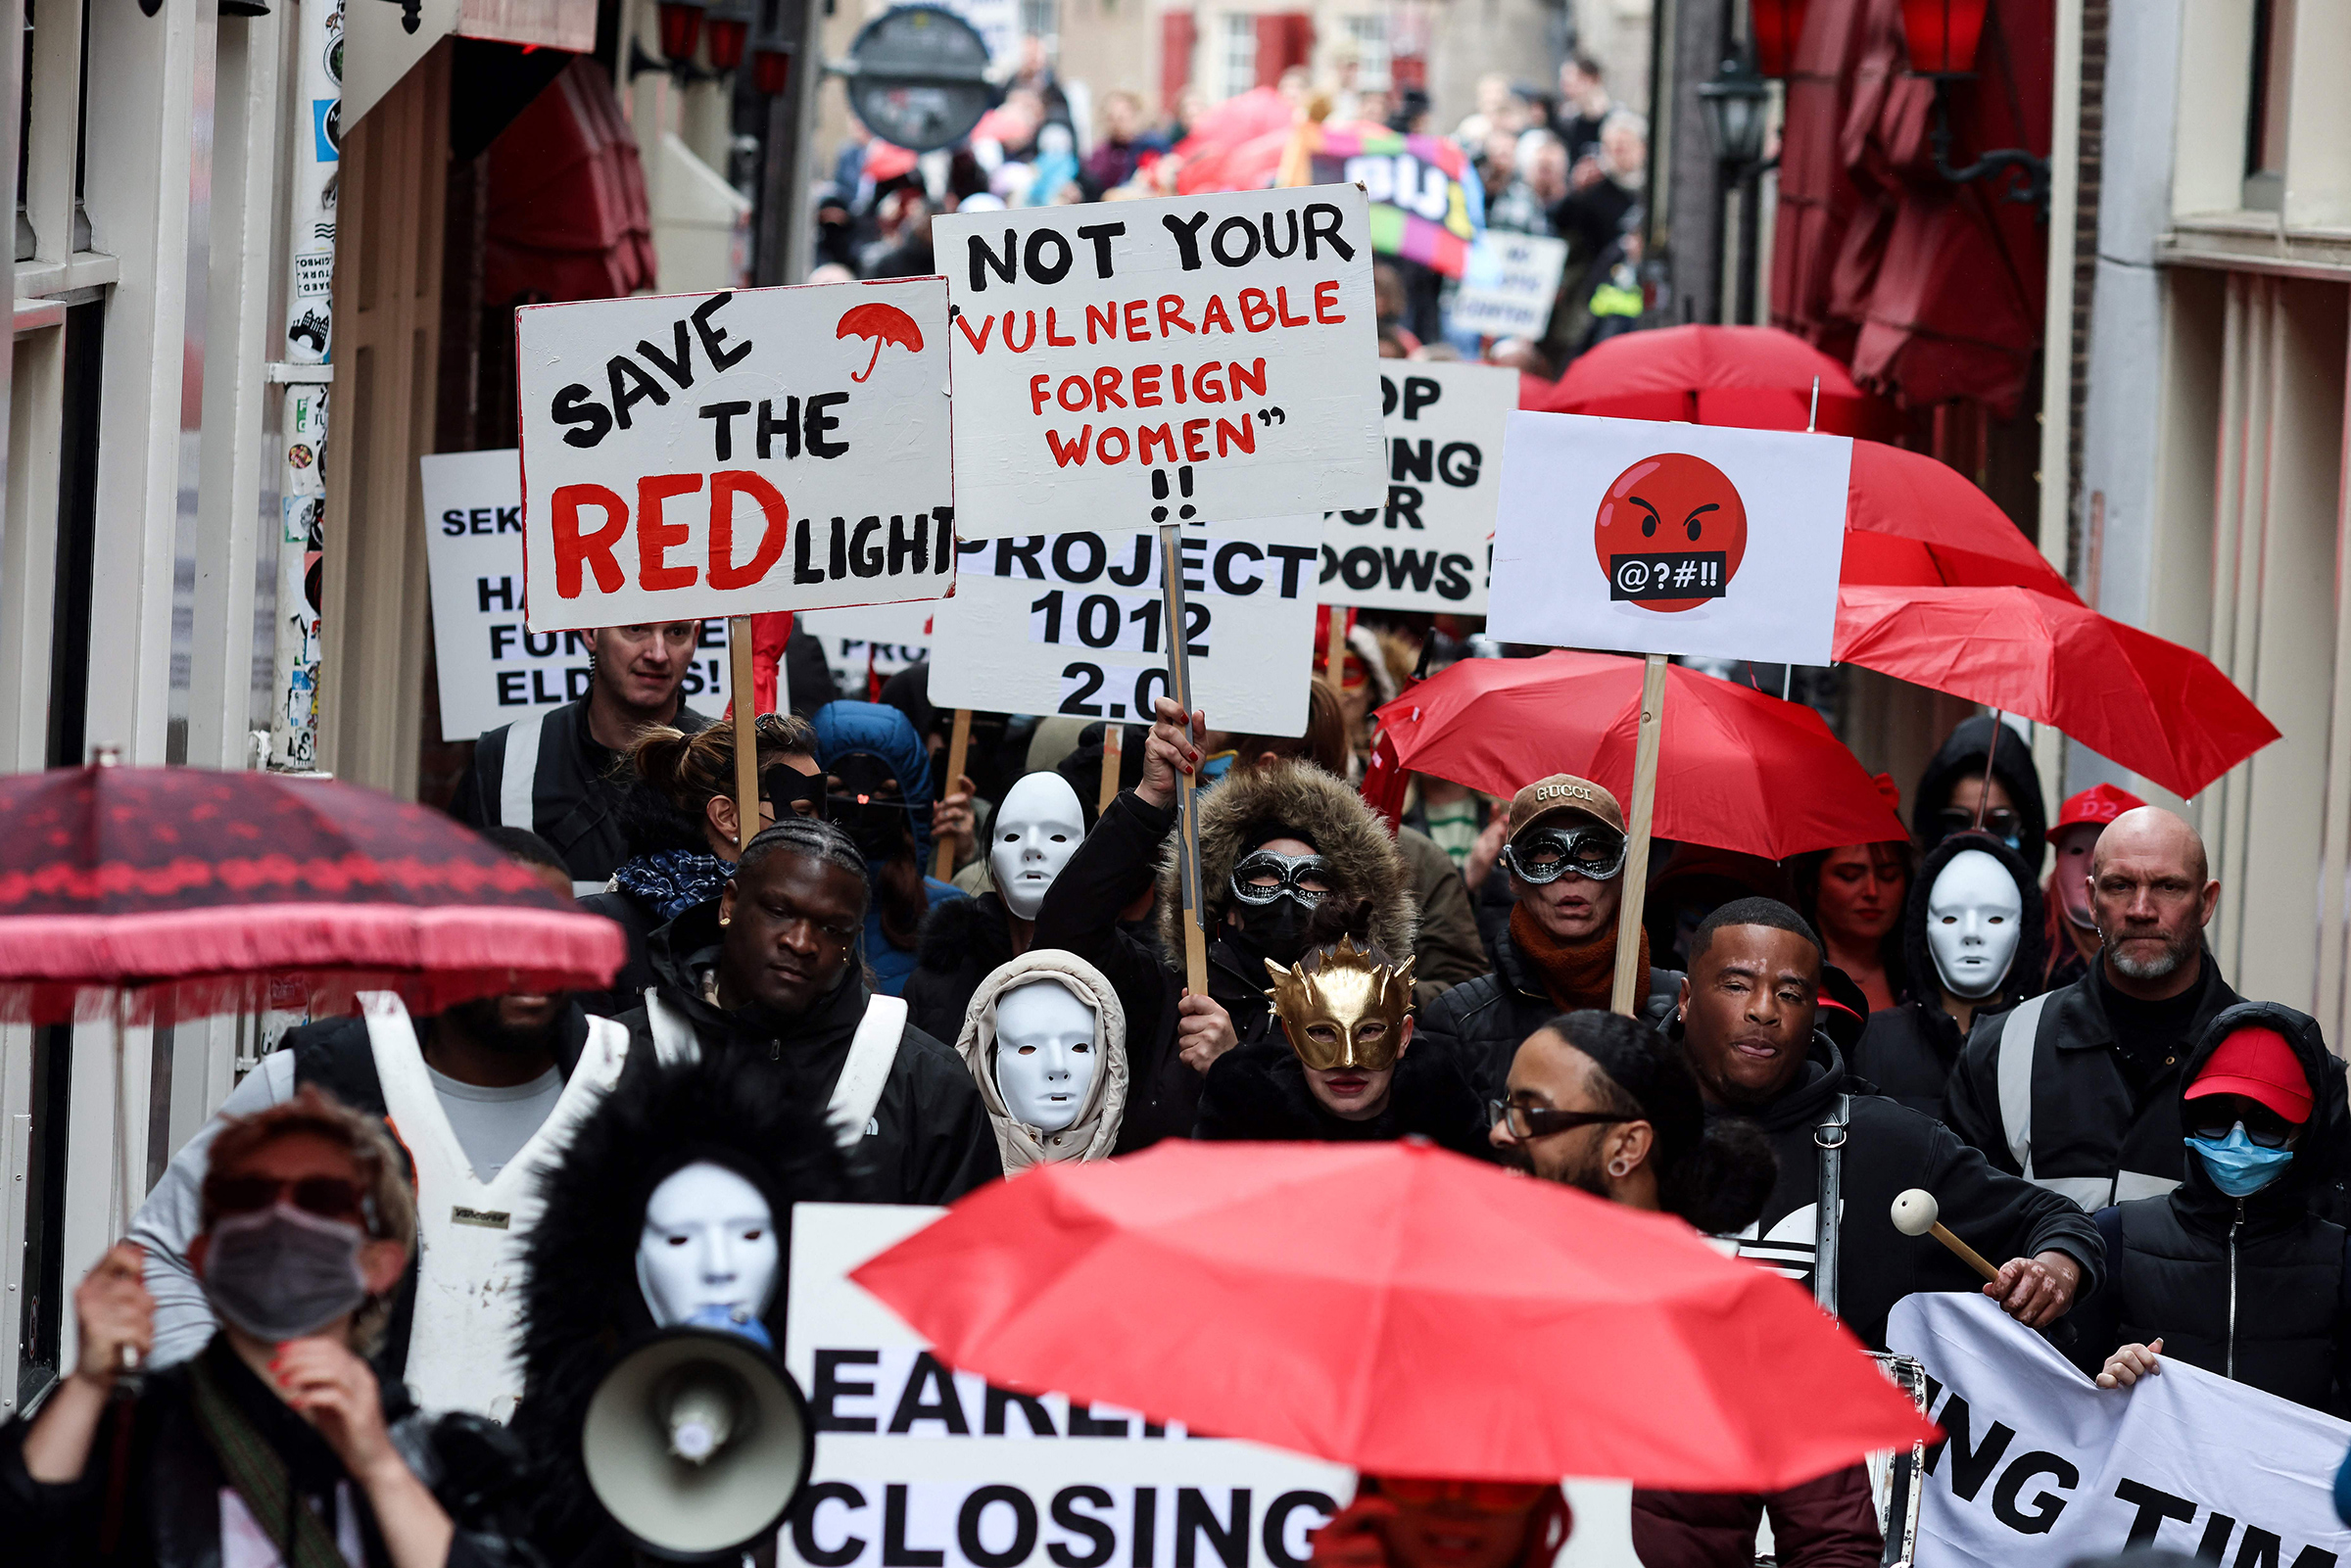 Sex workers and sympathizers take part in a demonstration to protest plans to shutter the city's historic red light district, to be moved to a new erotic centre, in Amsterdam on March 30. (Kenzo Tribouillard—AFP/Getty Images)